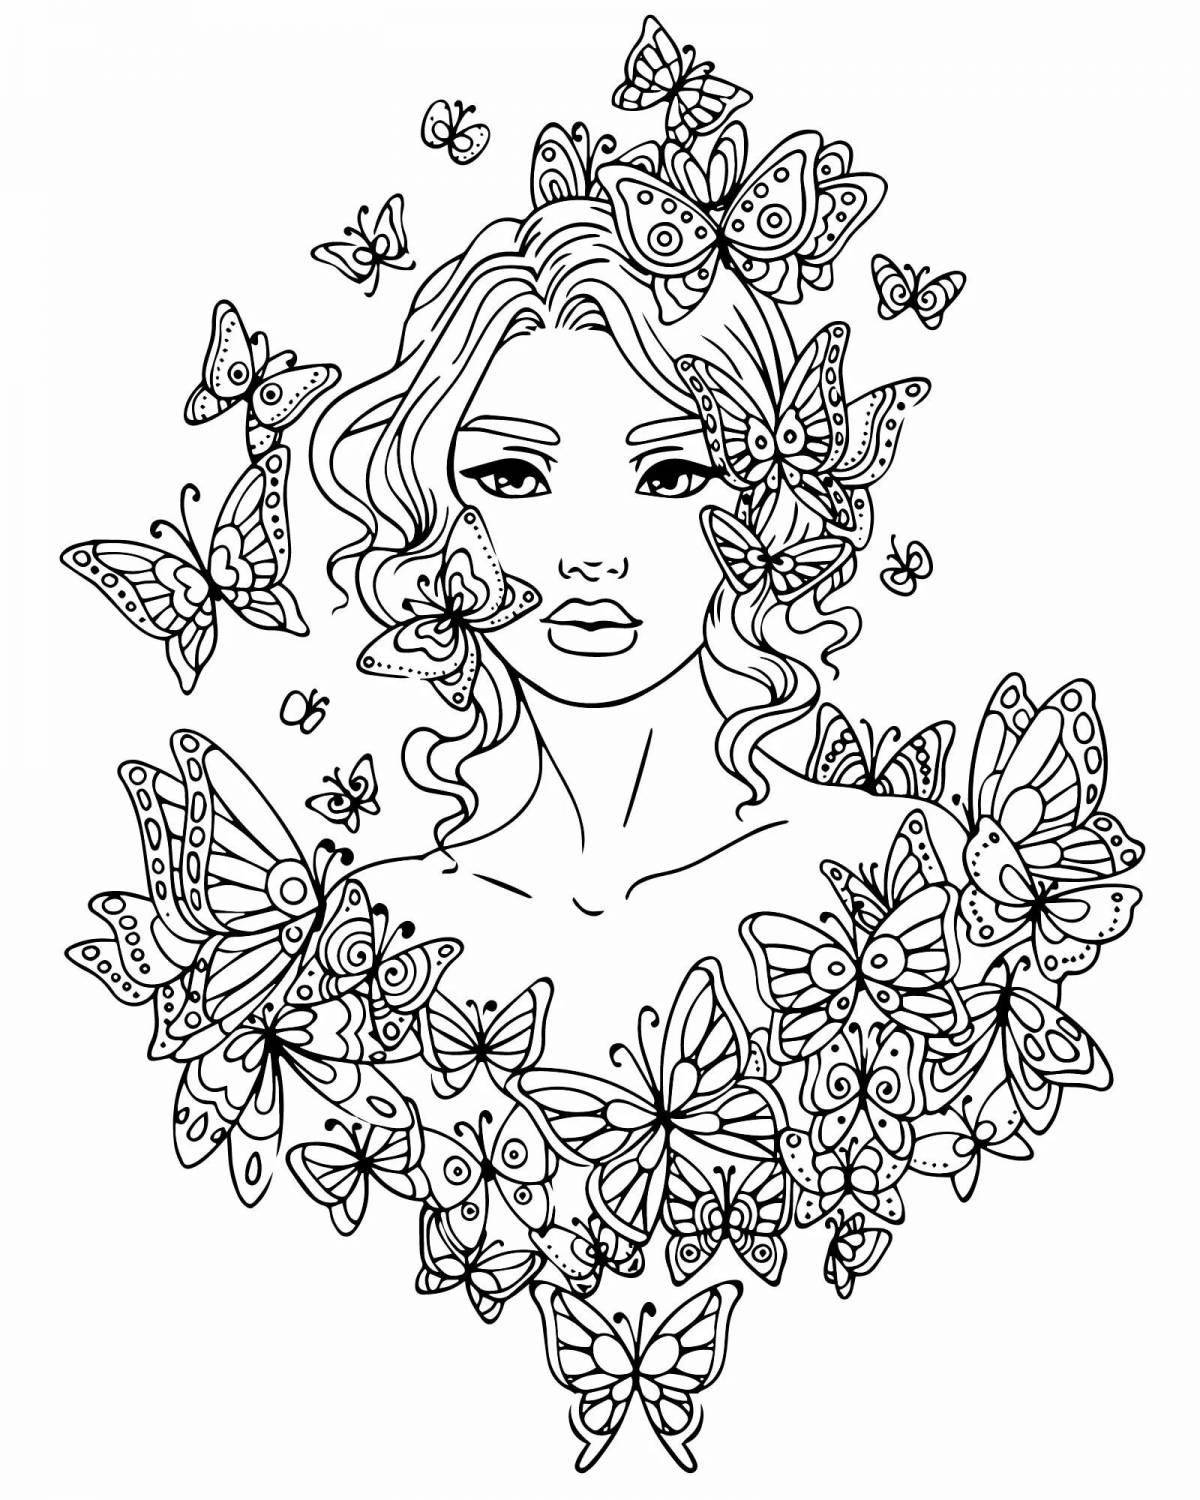 Blissful anti-stress coloring book for women